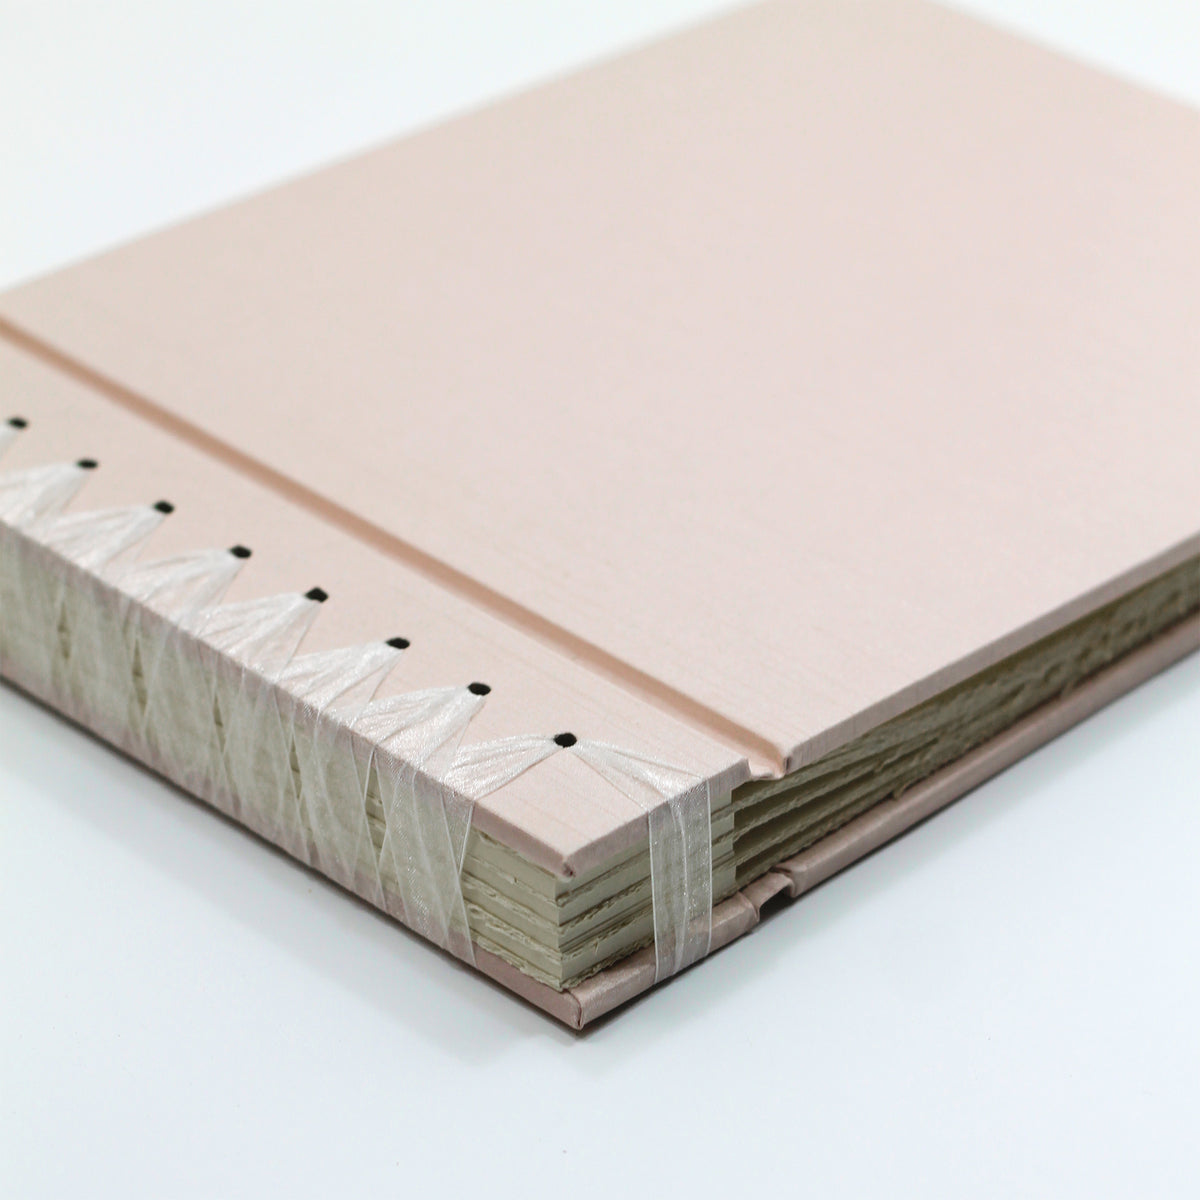 Large 10 x 15 Paper Page Album | Cover: Blush Pink Silk | Available Personalized